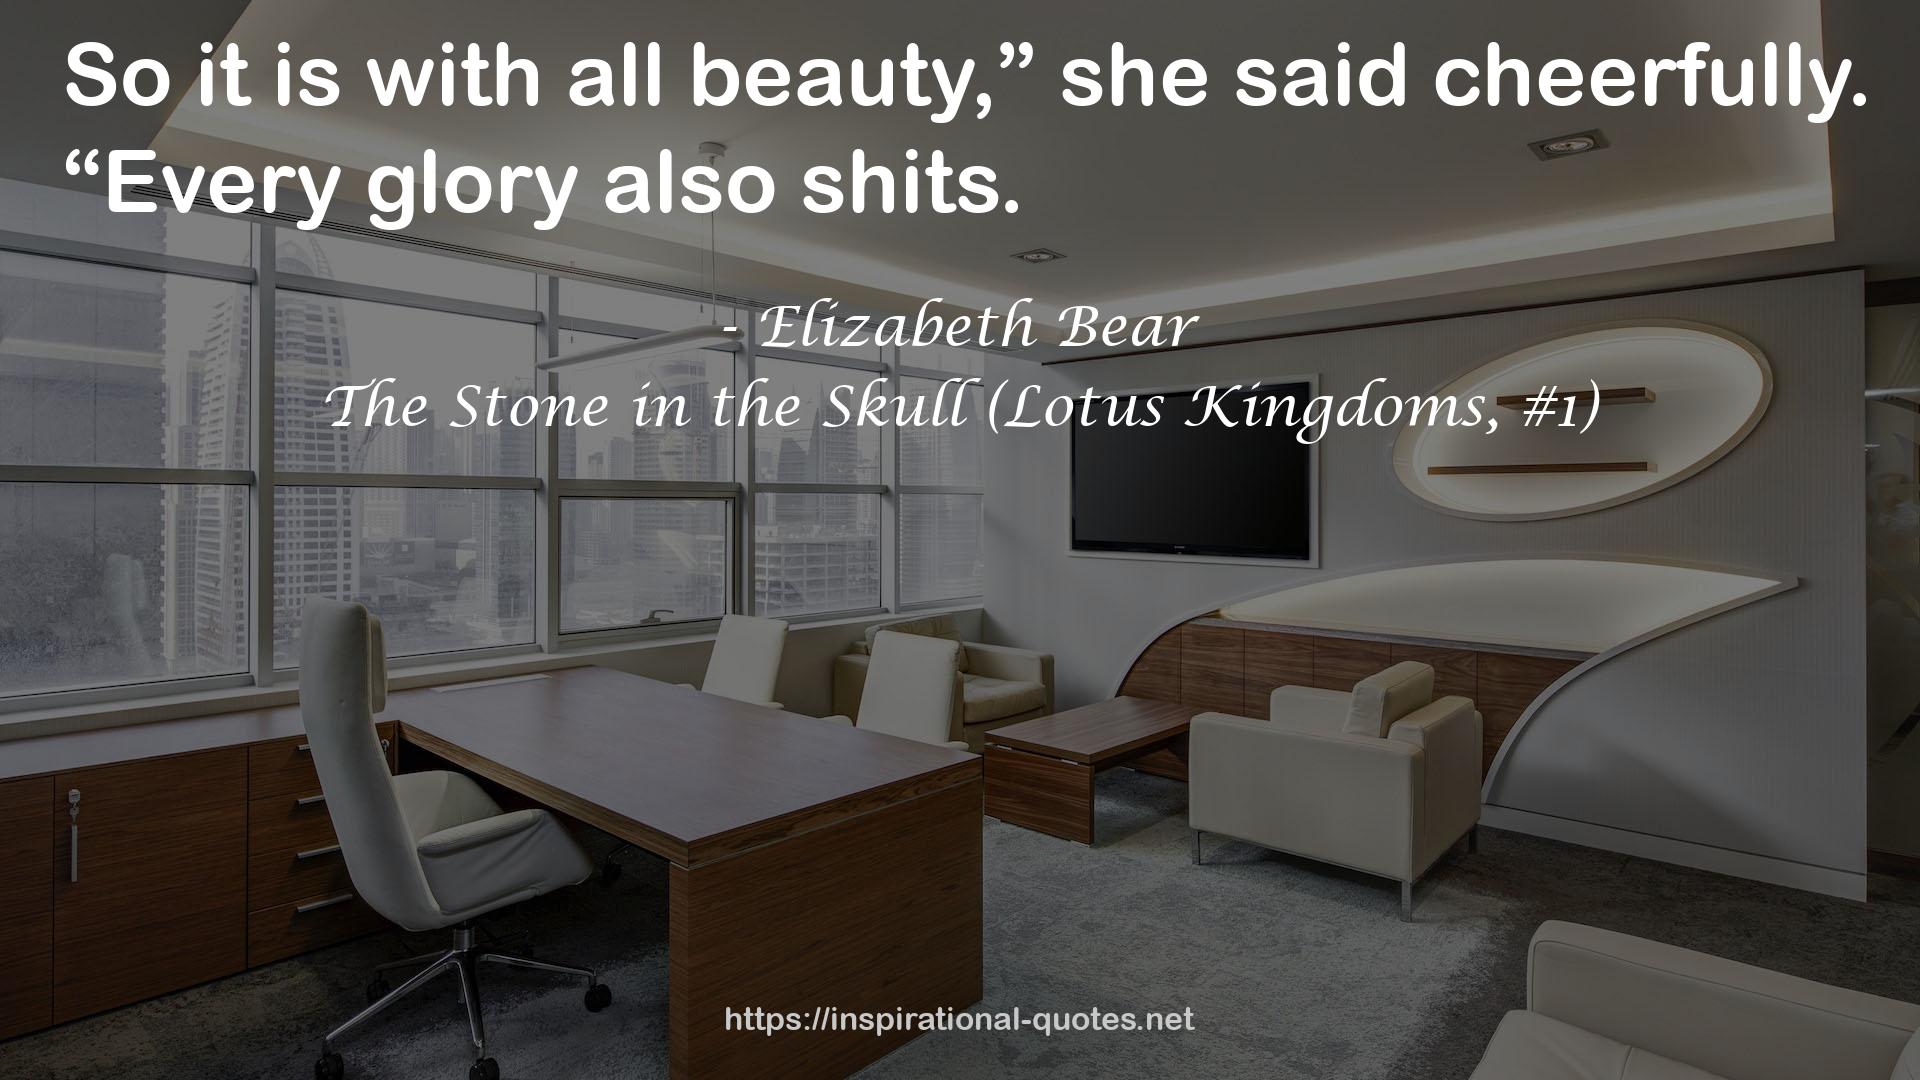 The Stone in the Skull (Lotus Kingdoms, #1) QUOTES